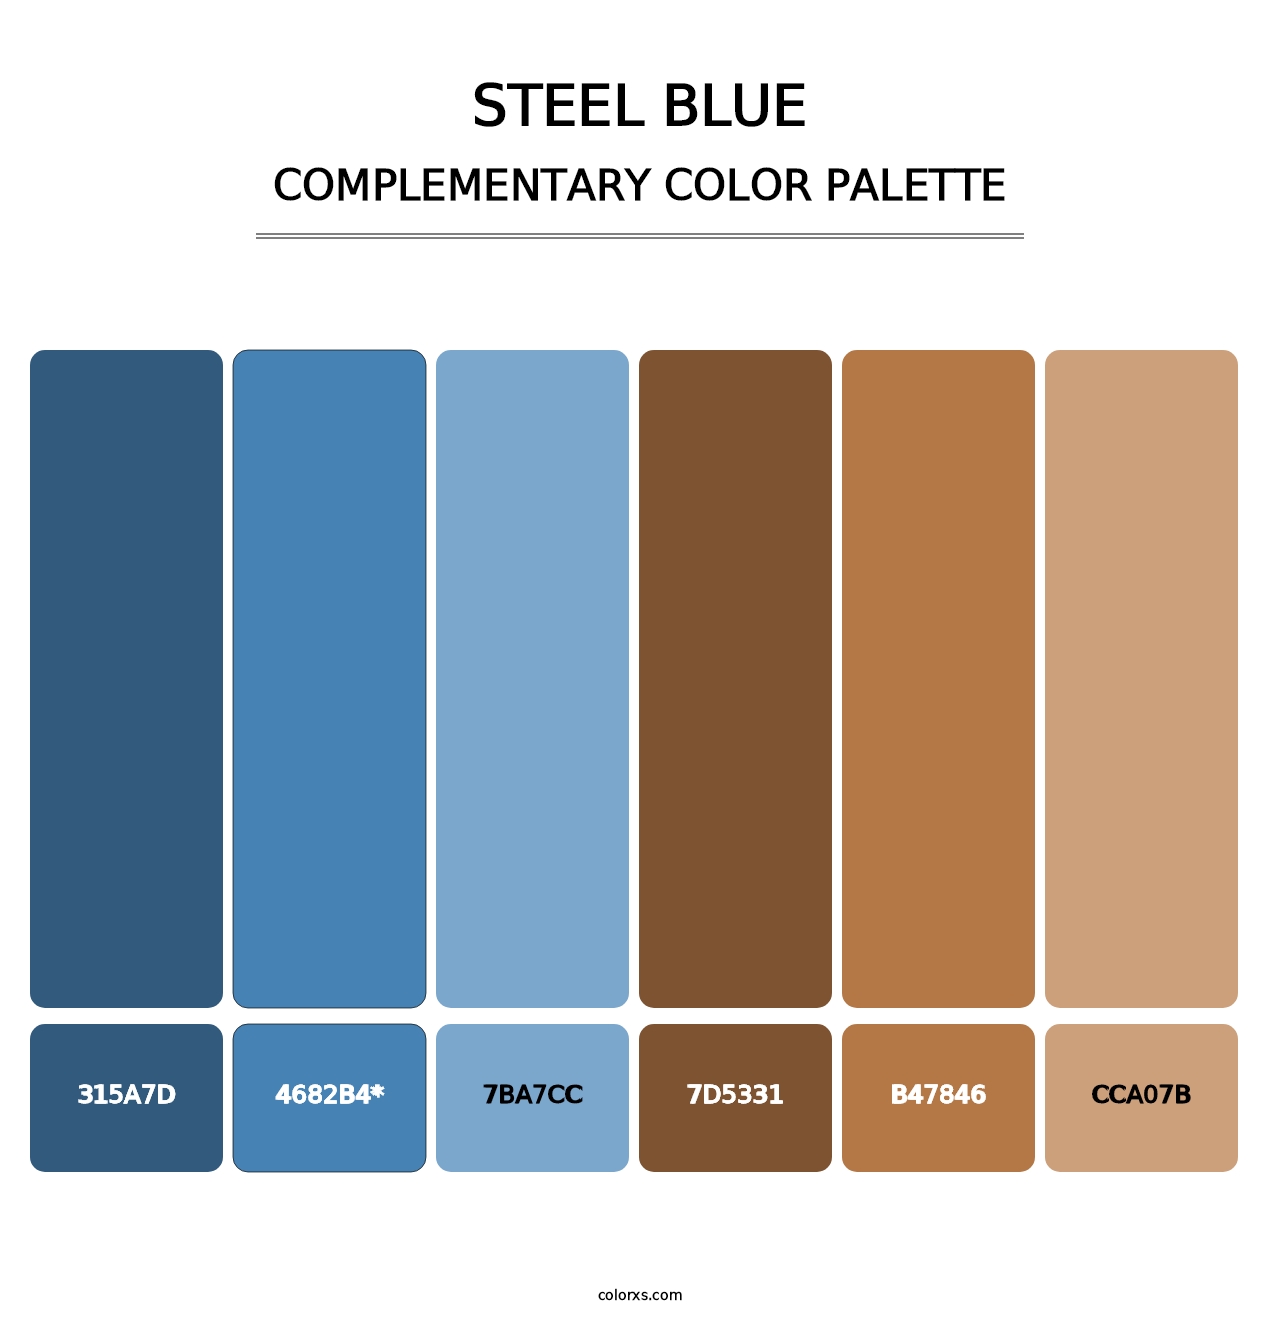 Steel Blue - Complementary Color Palette